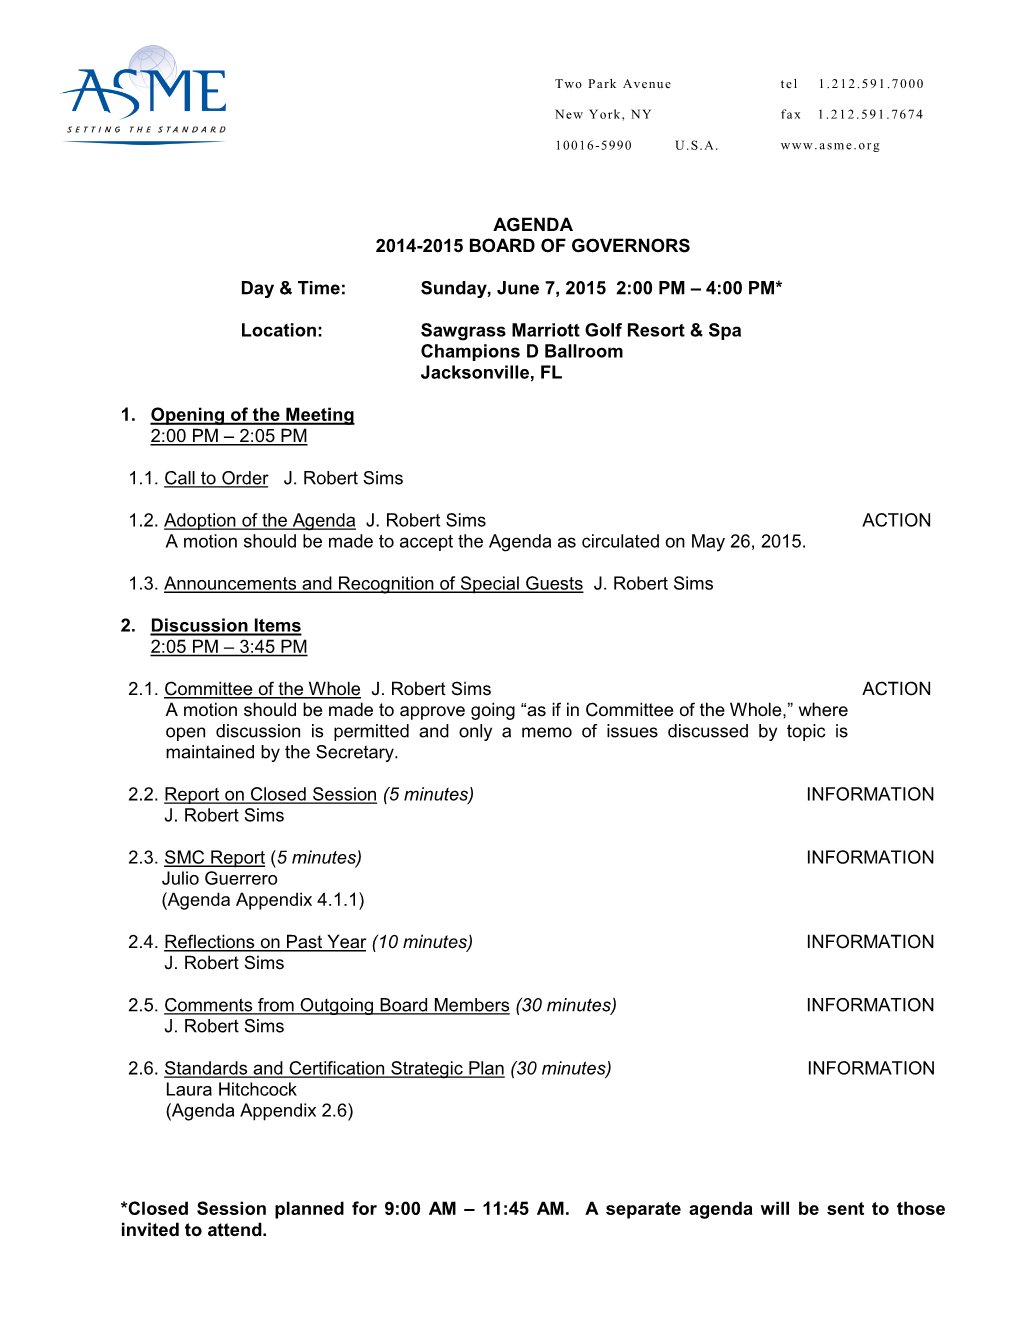 AGENDA 2014-2015 BOARD of GOVERNORS Day & Time: Sunday, June 7, 2015 2:00 PM – 4:00 PM* Location: Sawgrass Marriott Golf